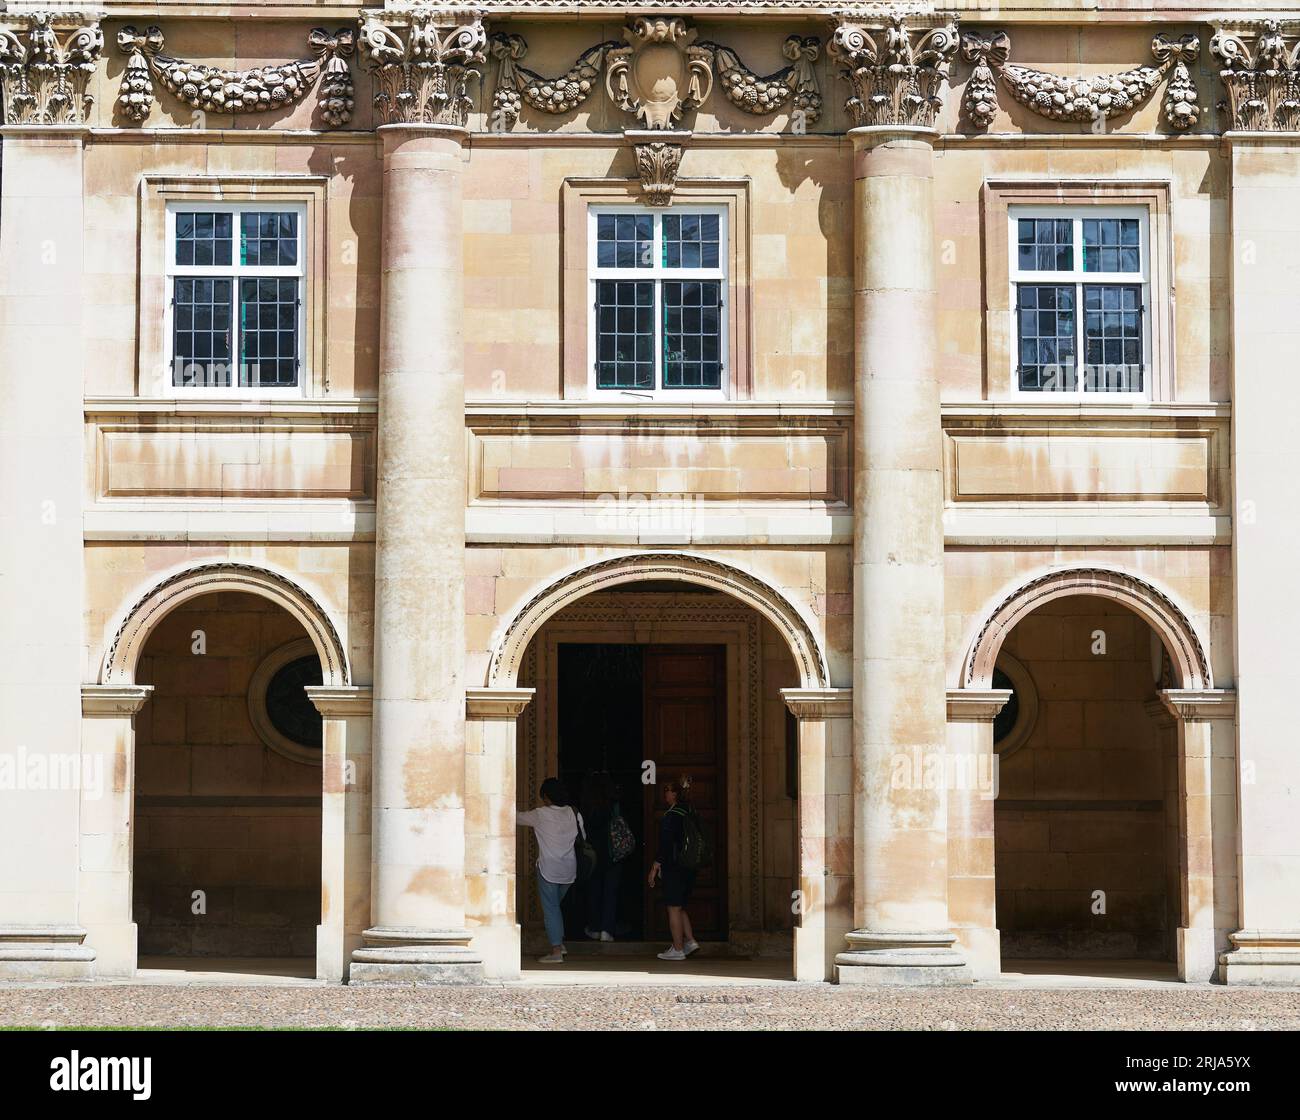 Trio of arches and windows at the entrance to the chapel of Emmanuel College, University of Cambridge, England. Stock Photo